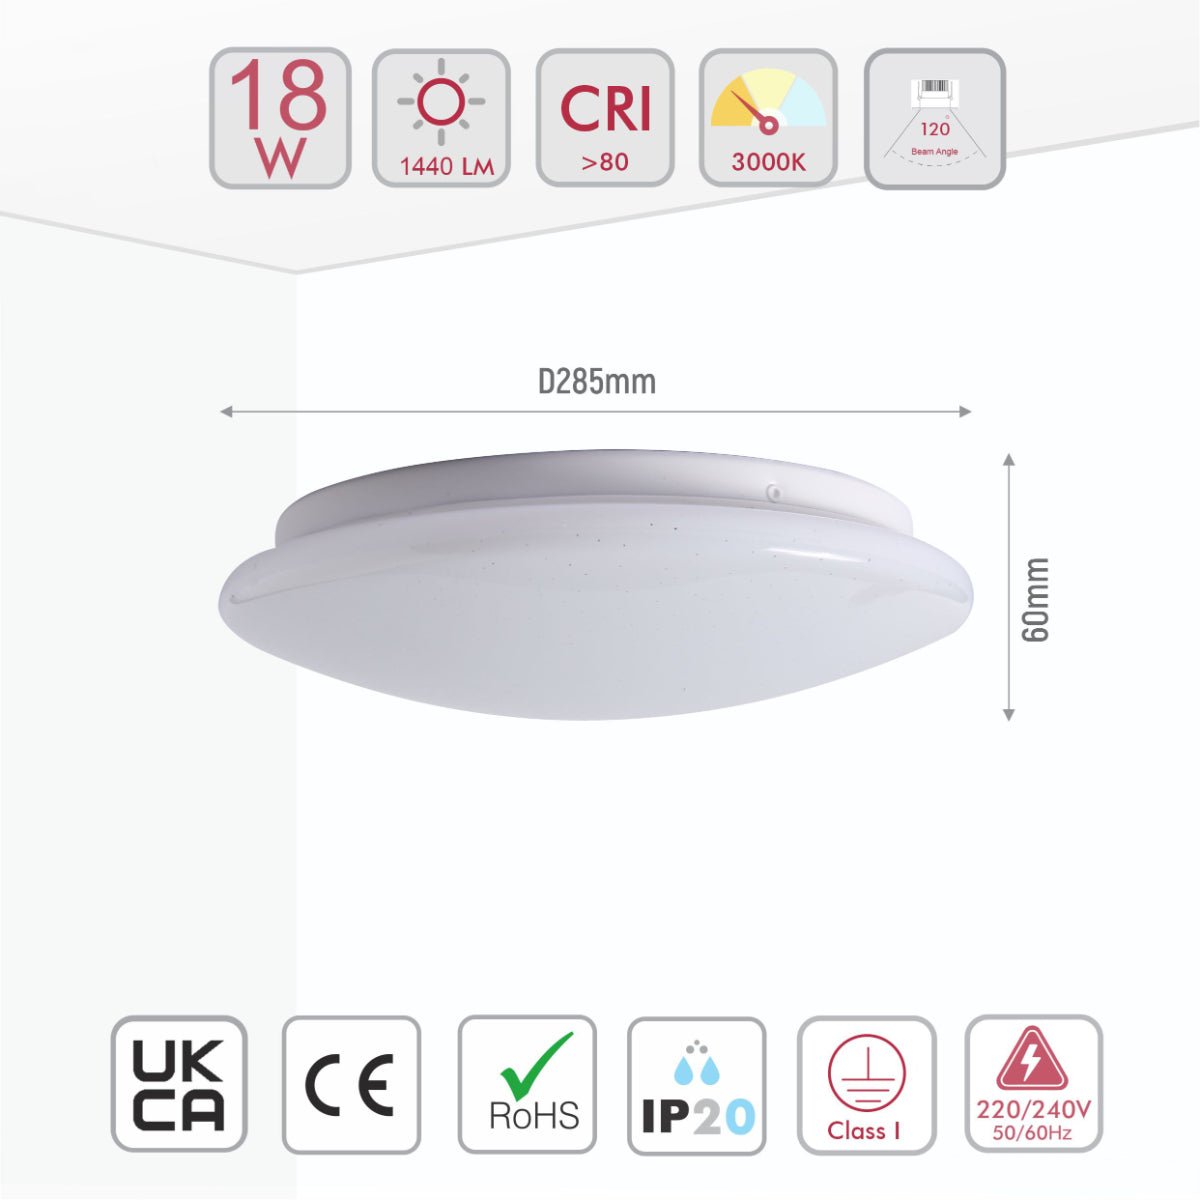 Size and specs of Moonlight Flush Ceiling Light 18W Warm White Cool White Cool Daylight 1440LM IP20 non-yellowing PMMA Cover | TEKLED 121-03986